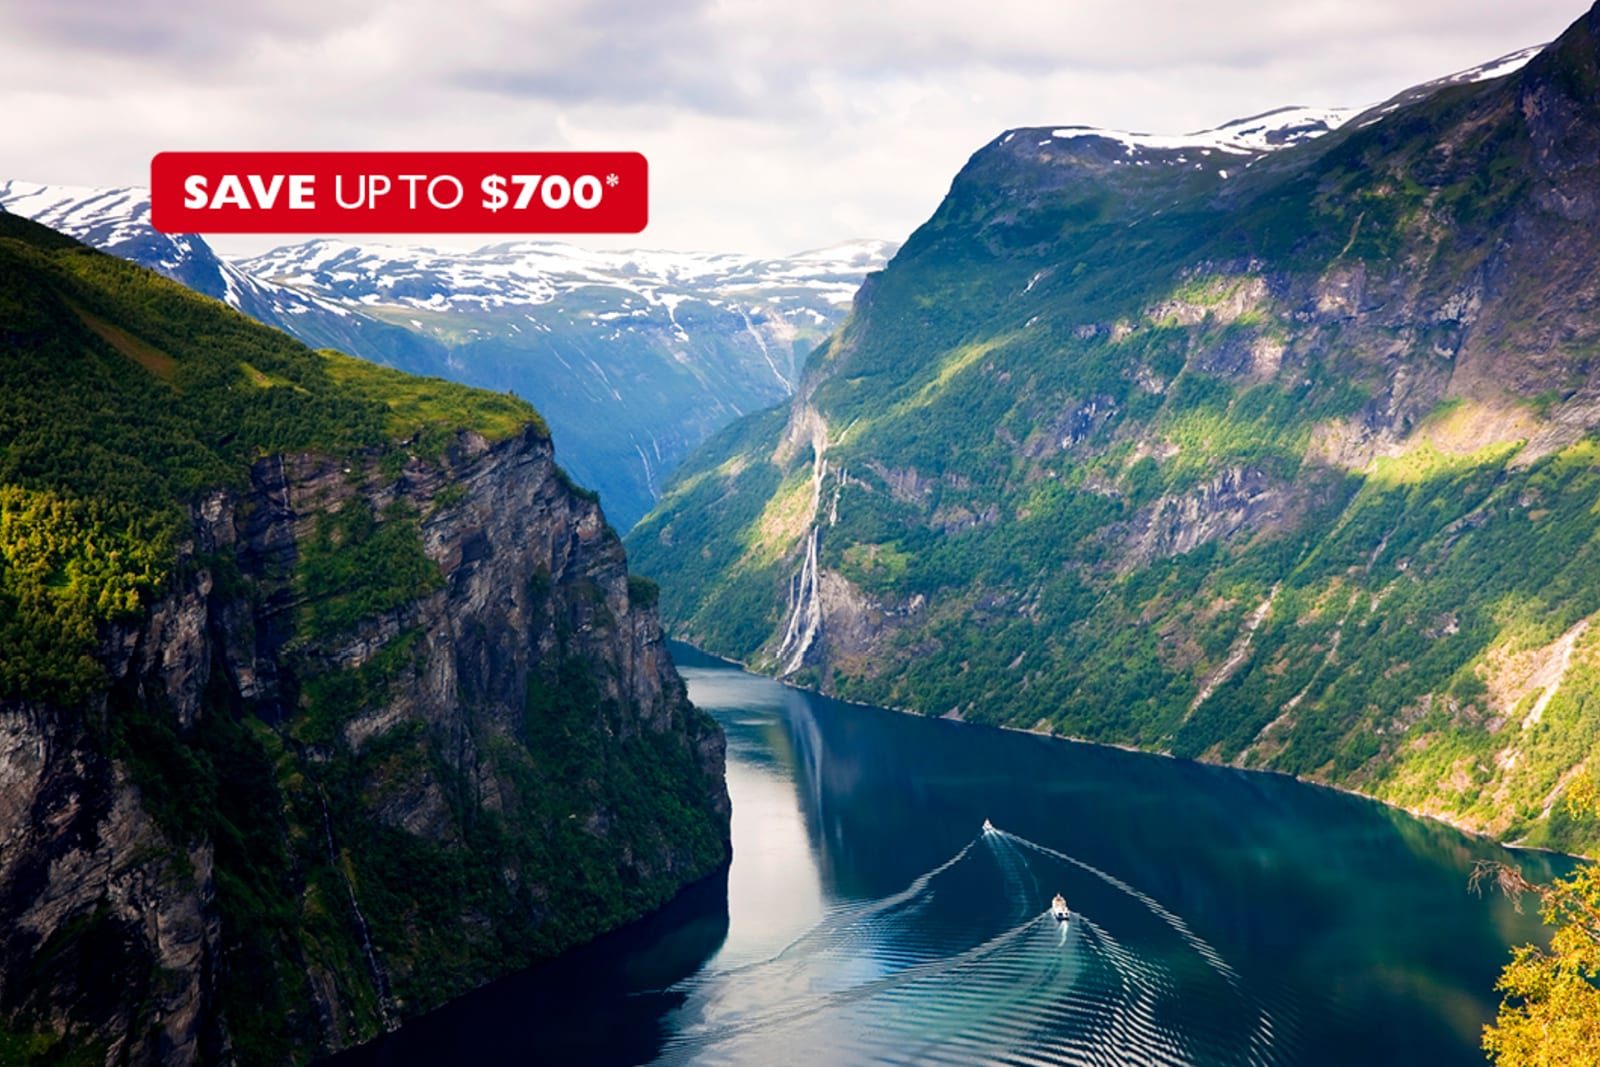 If you want to get up close to Norway's famous fjords, Holland America Line's Norse Legends cruise is the way to go